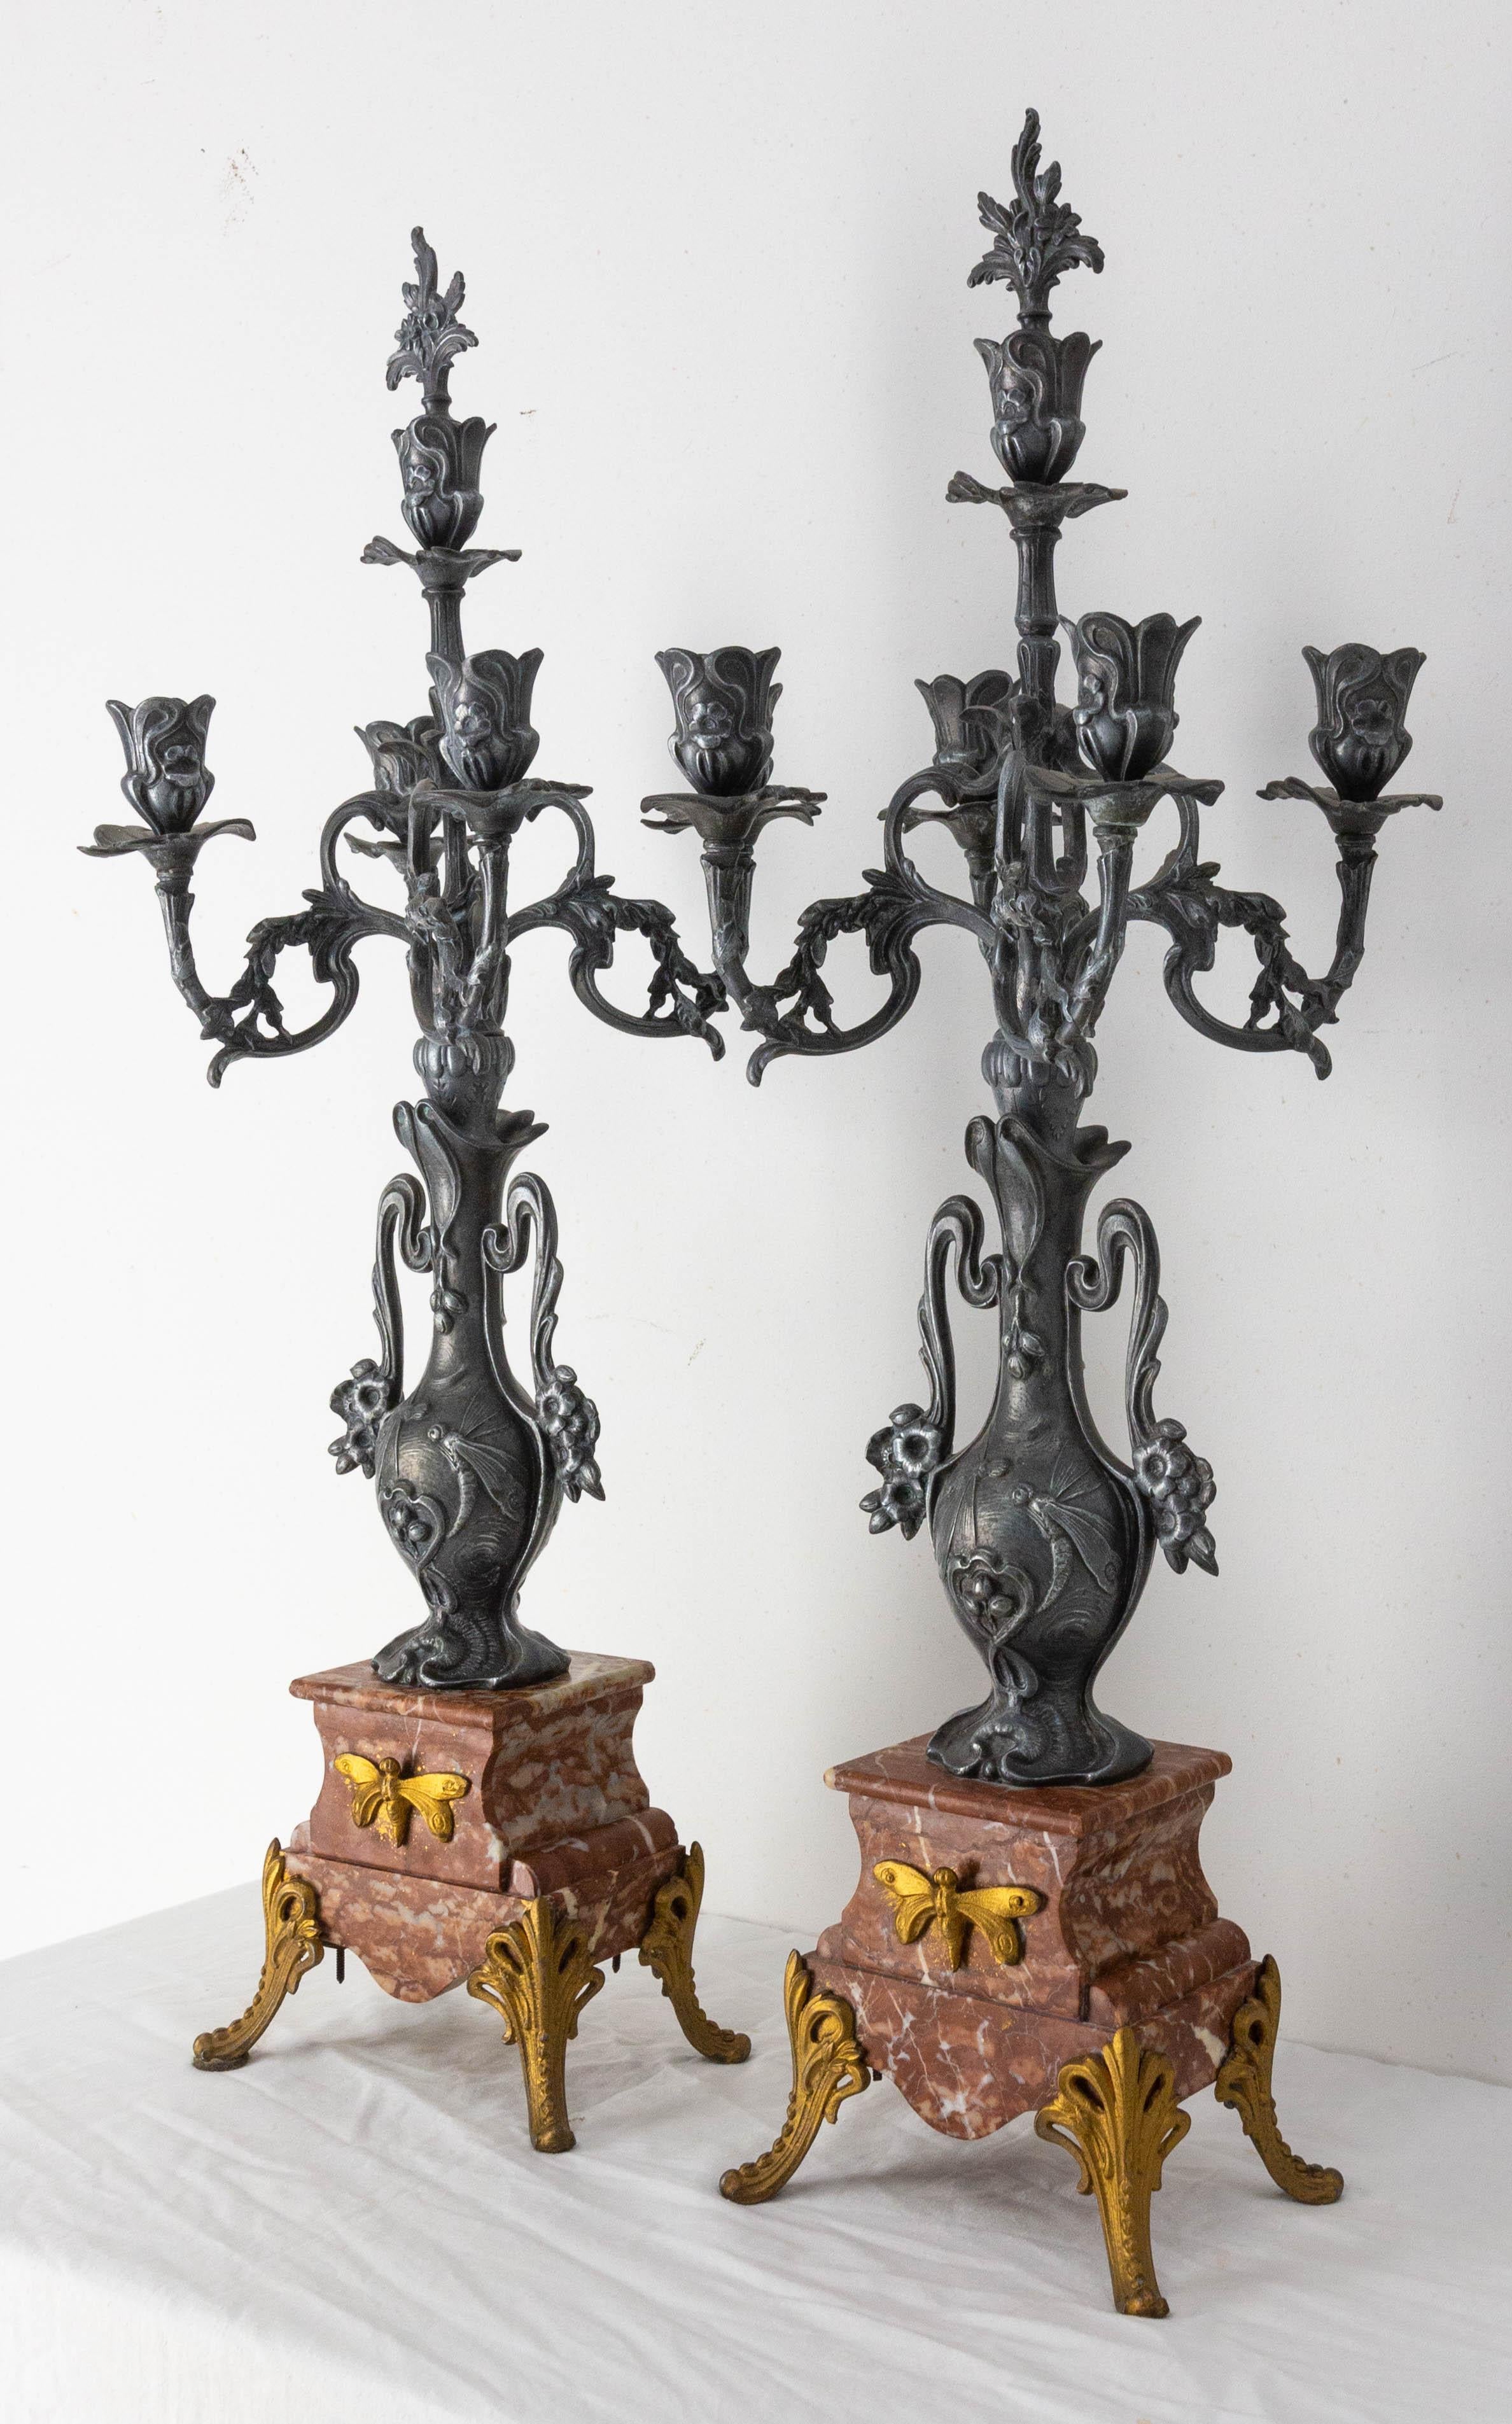 Pair of Marble and zamac candelabras
French art Nouveau candle holder
Natural decoration with dragonflies, butterflies and flowers
circa 1900
Good antique condition

Shipping:
L62 P47 H23 8,6kg.

